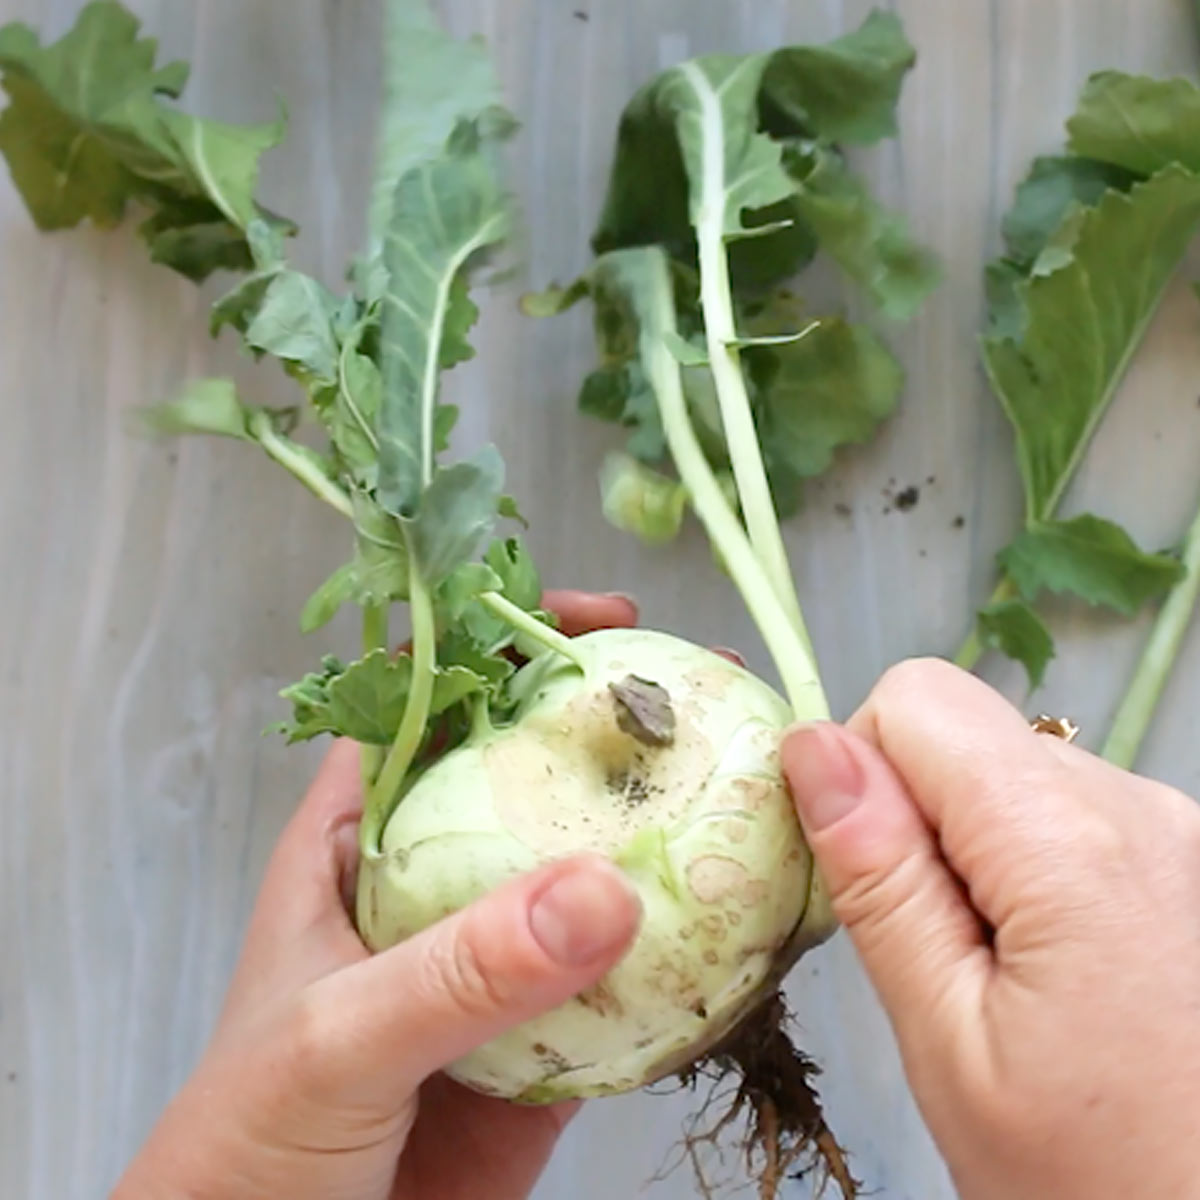 remove stem and leaves from the kohlrabi